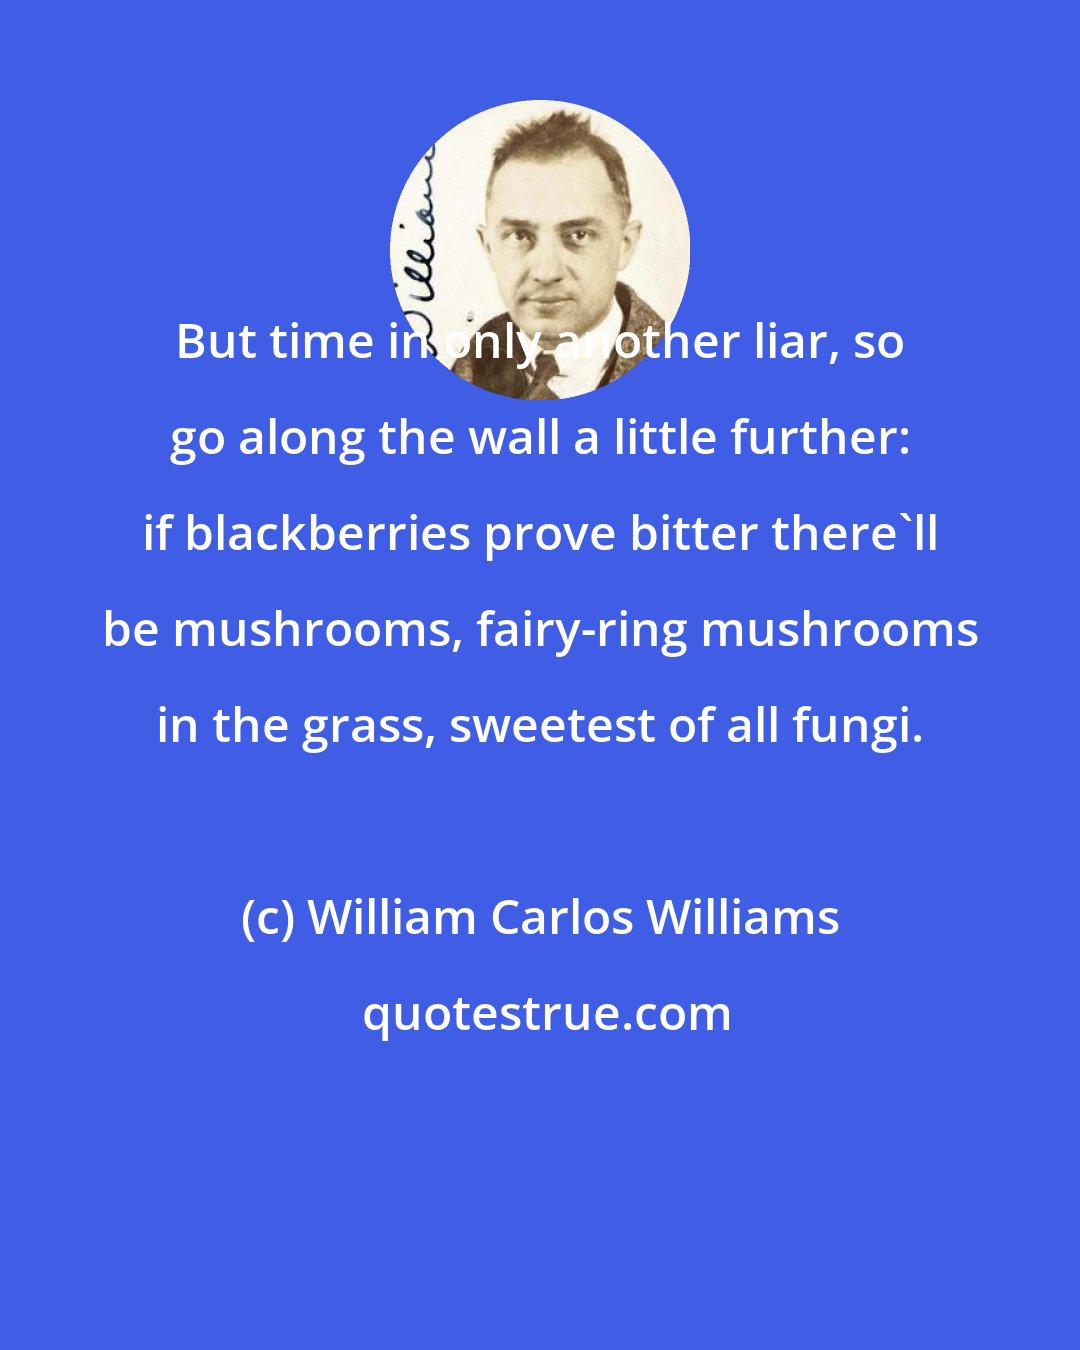 William Carlos Williams: But time in only another liar, so go along the wall a little further: if blackberries prove bitter there'll be mushrooms, fairy-ring mushrooms in the grass, sweetest of all fungi.